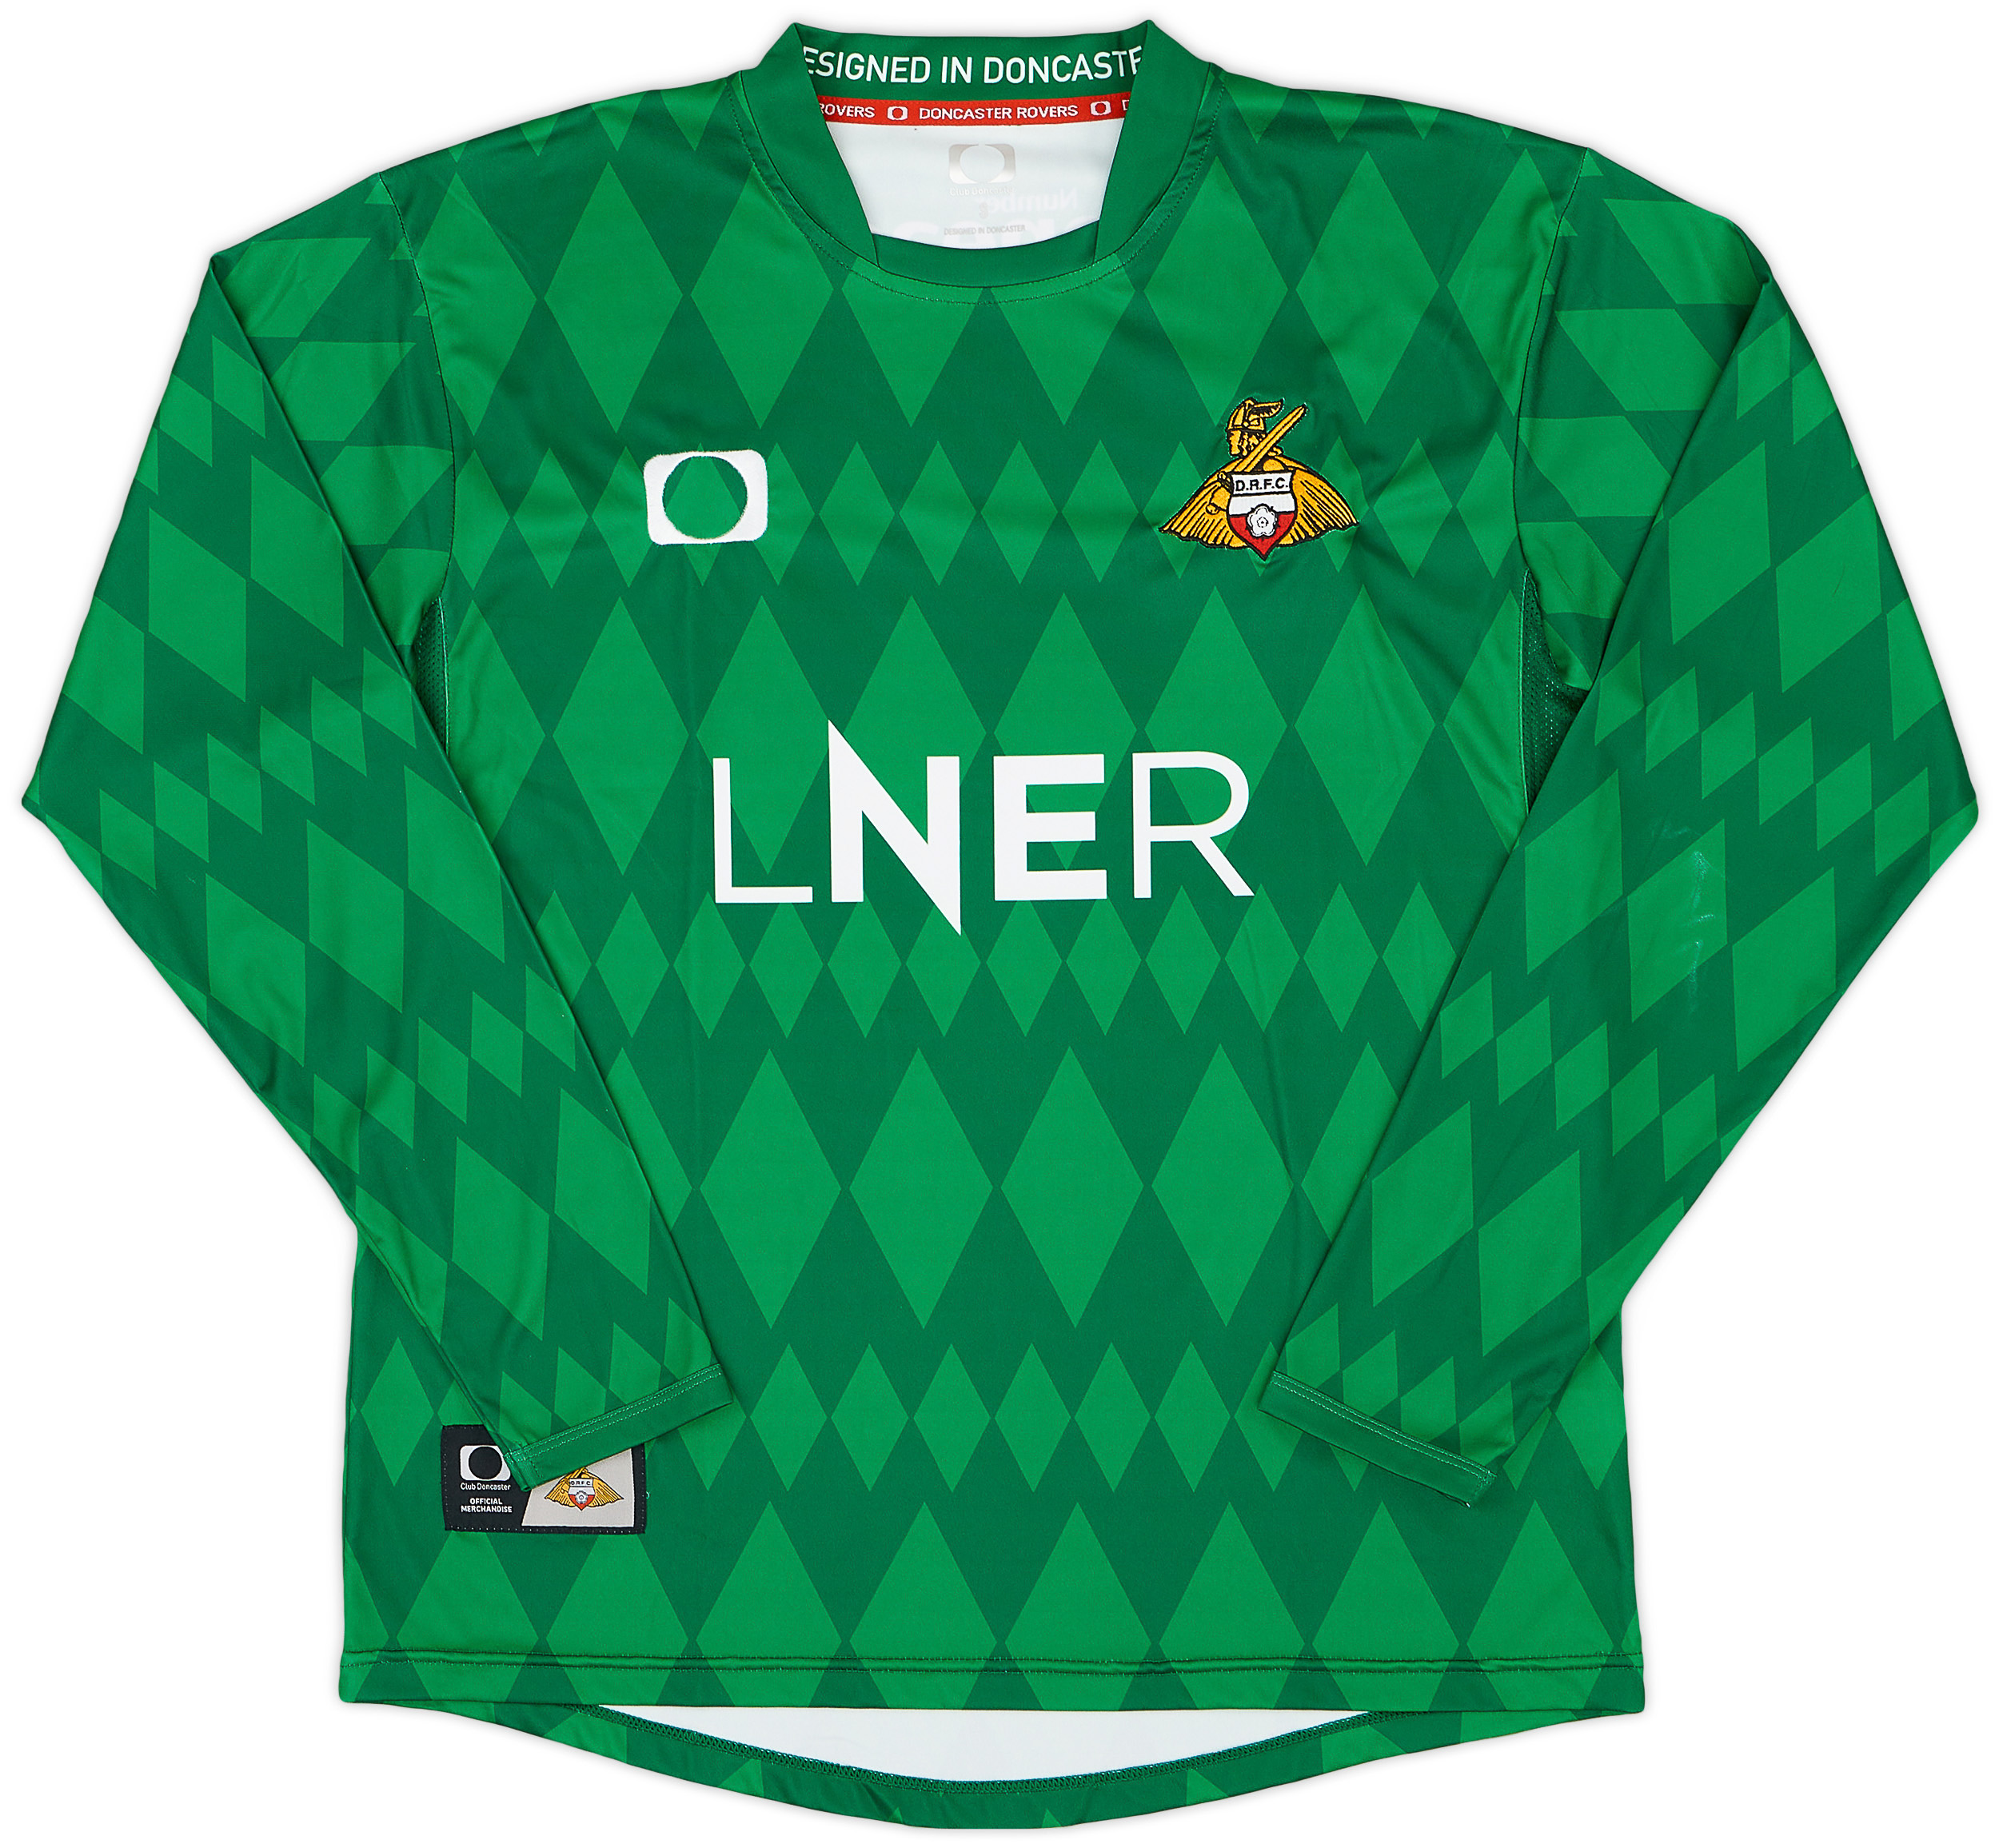 2020-21 Doncaster Rovers GK Shirt - 8/10 - ()